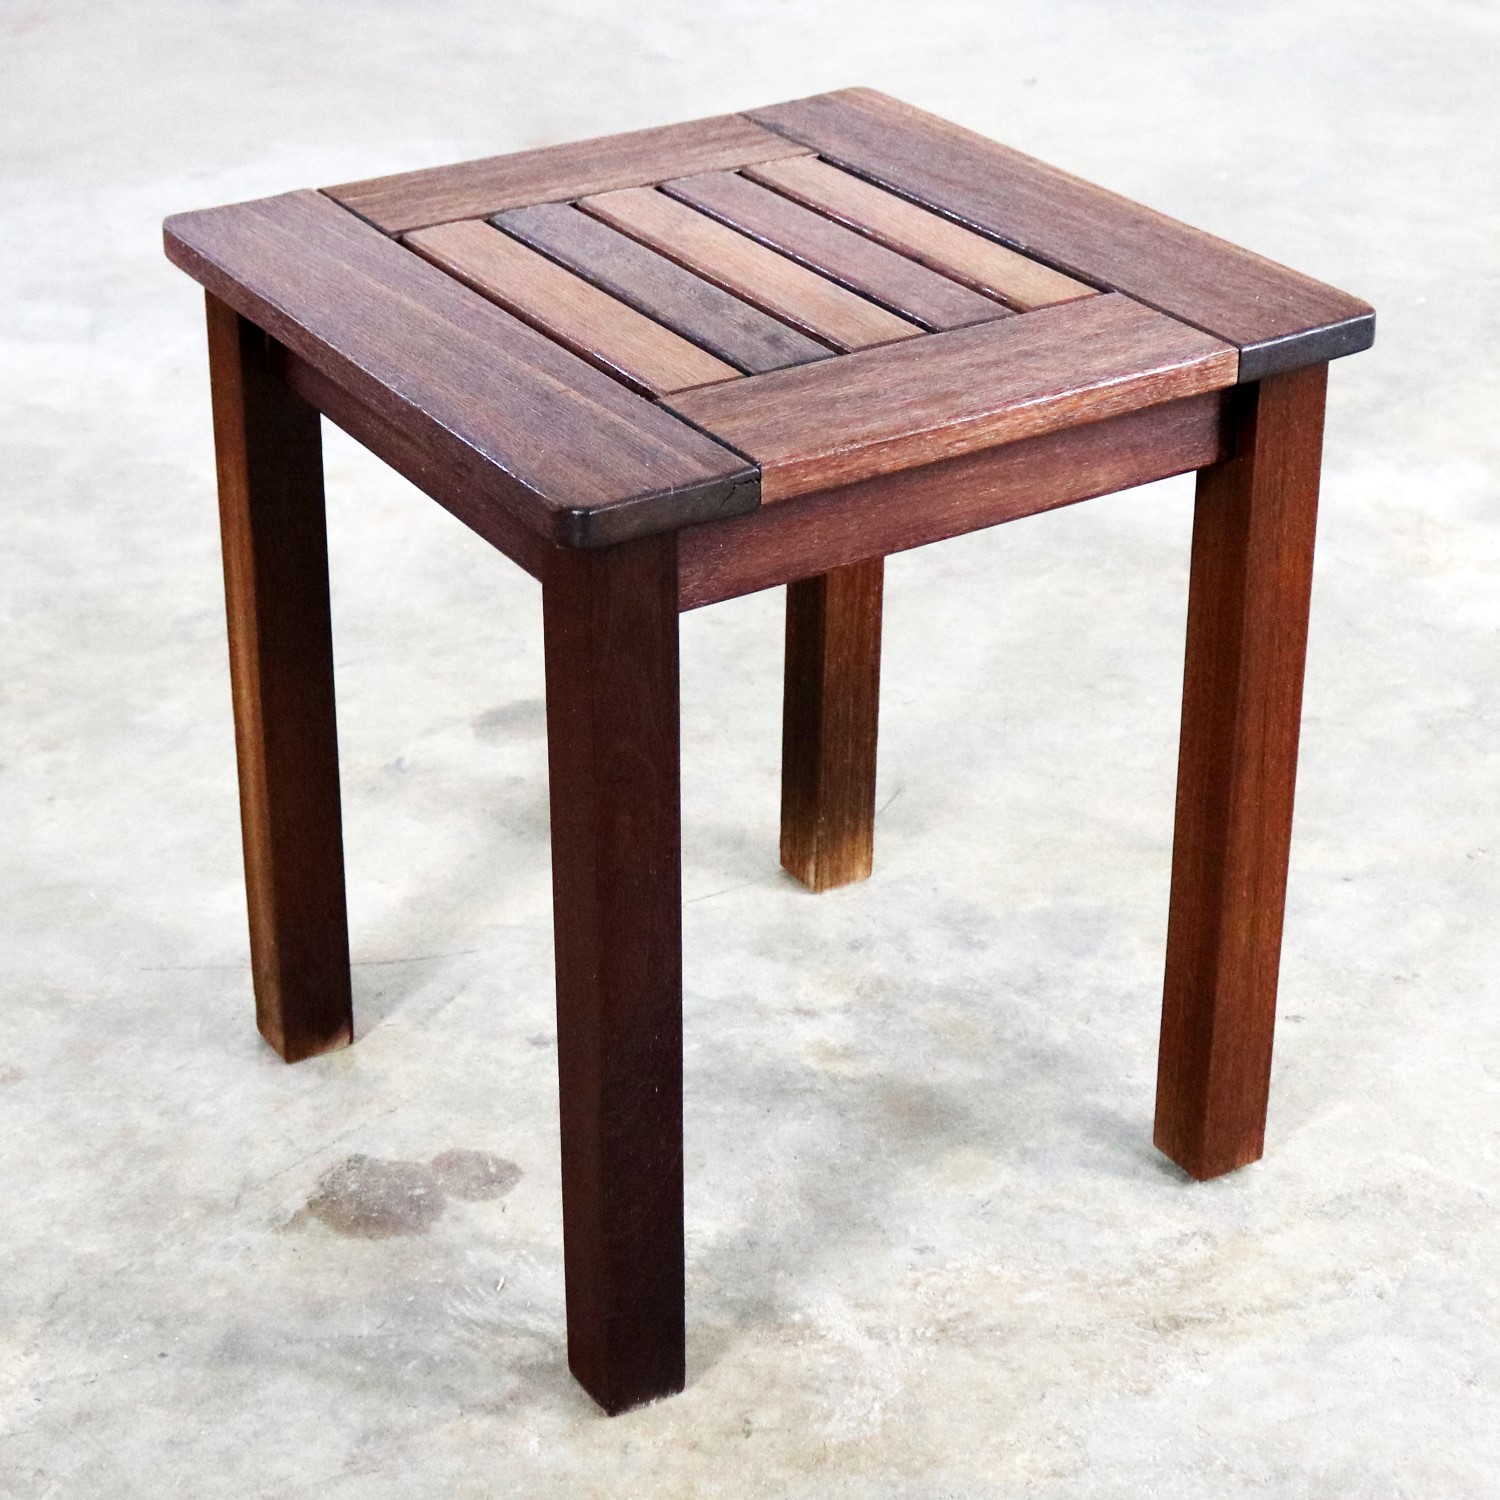 Add Style And Functionality To Your Patio With Teak Patio Side Tables